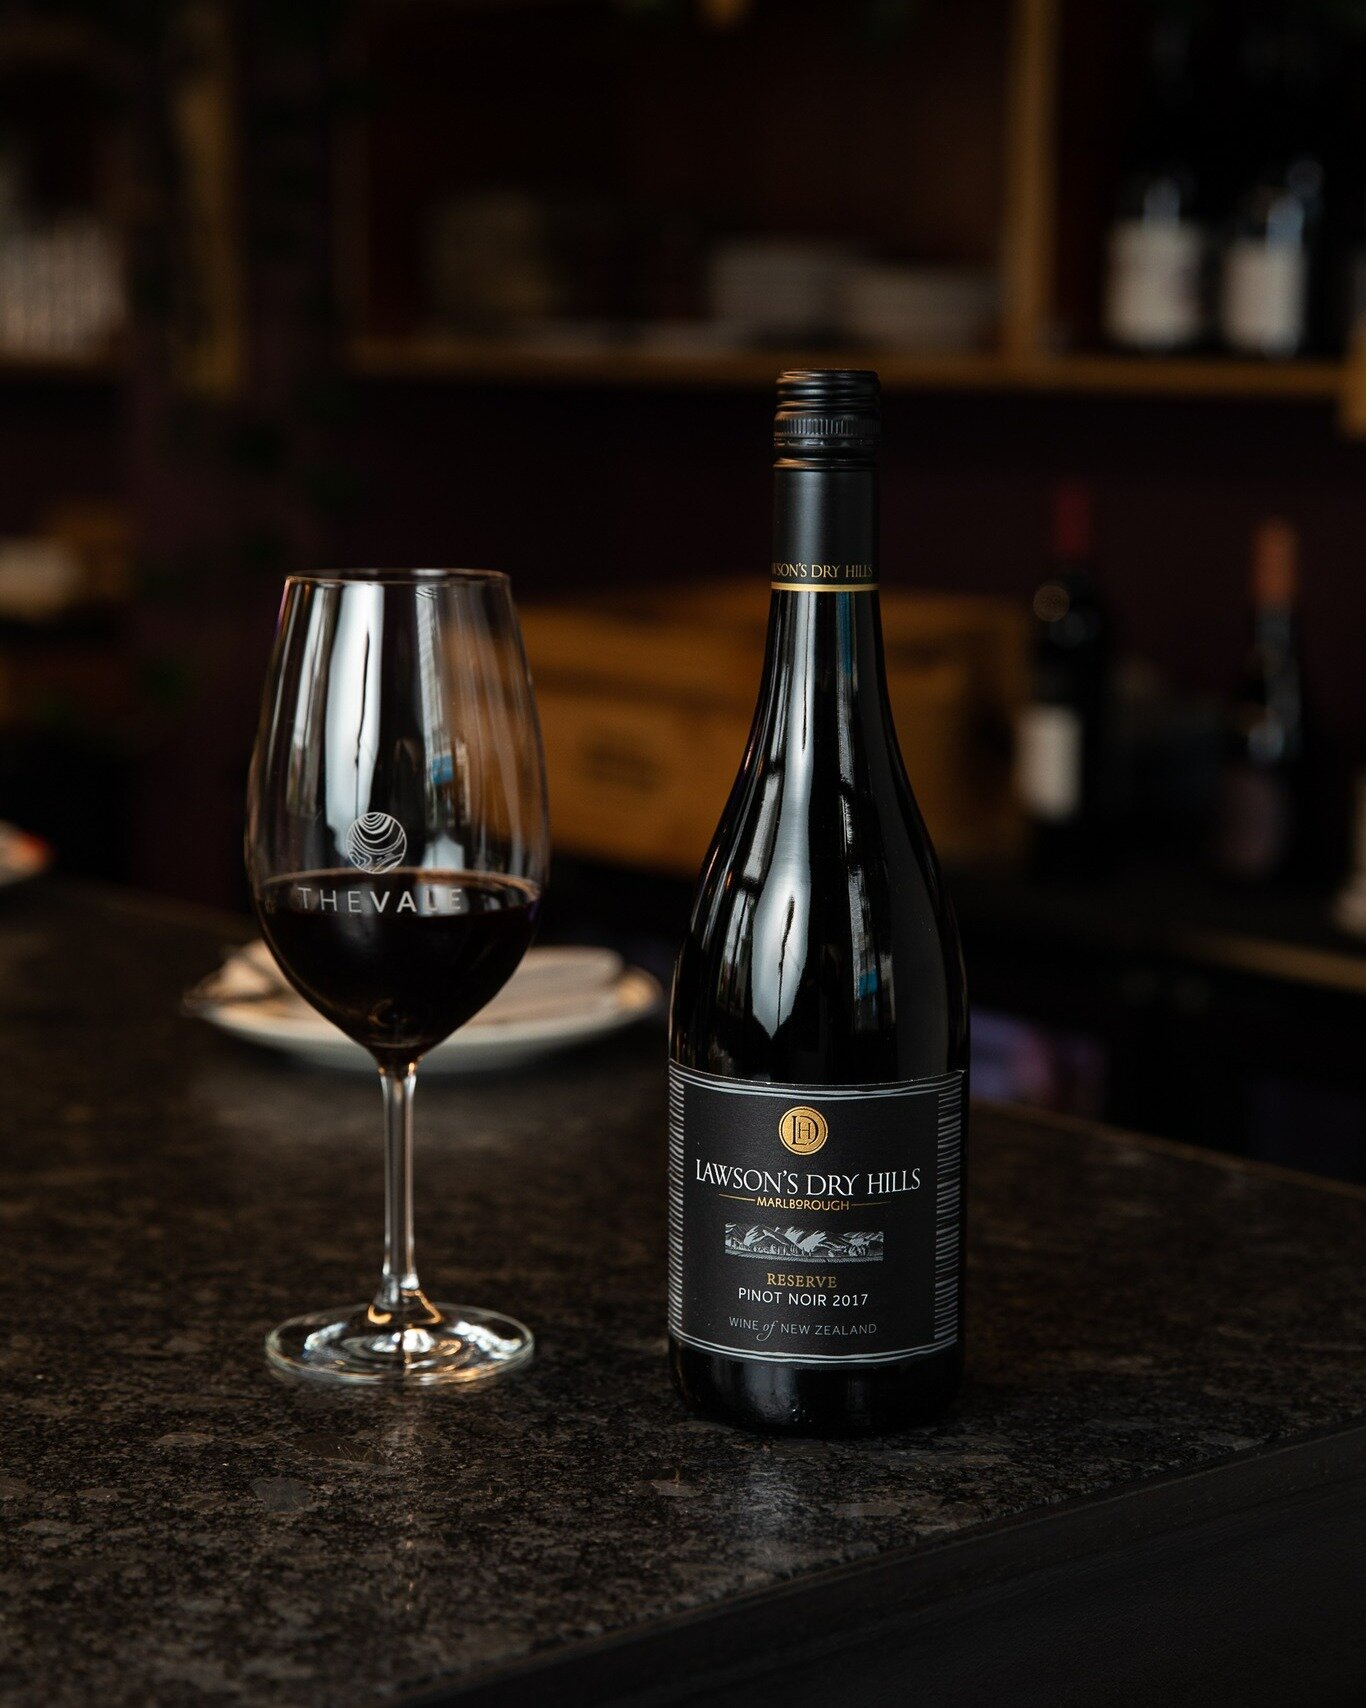 It's well and truly red wine season, and we've got a carefully selected, diverse range of bottles to keep you happy this winter. Pop a bottle by the fire by booking a table today.
.
.
.
 #TheVale #winebar #vino #dinnerdrinks #ascotvale #foodandwine #